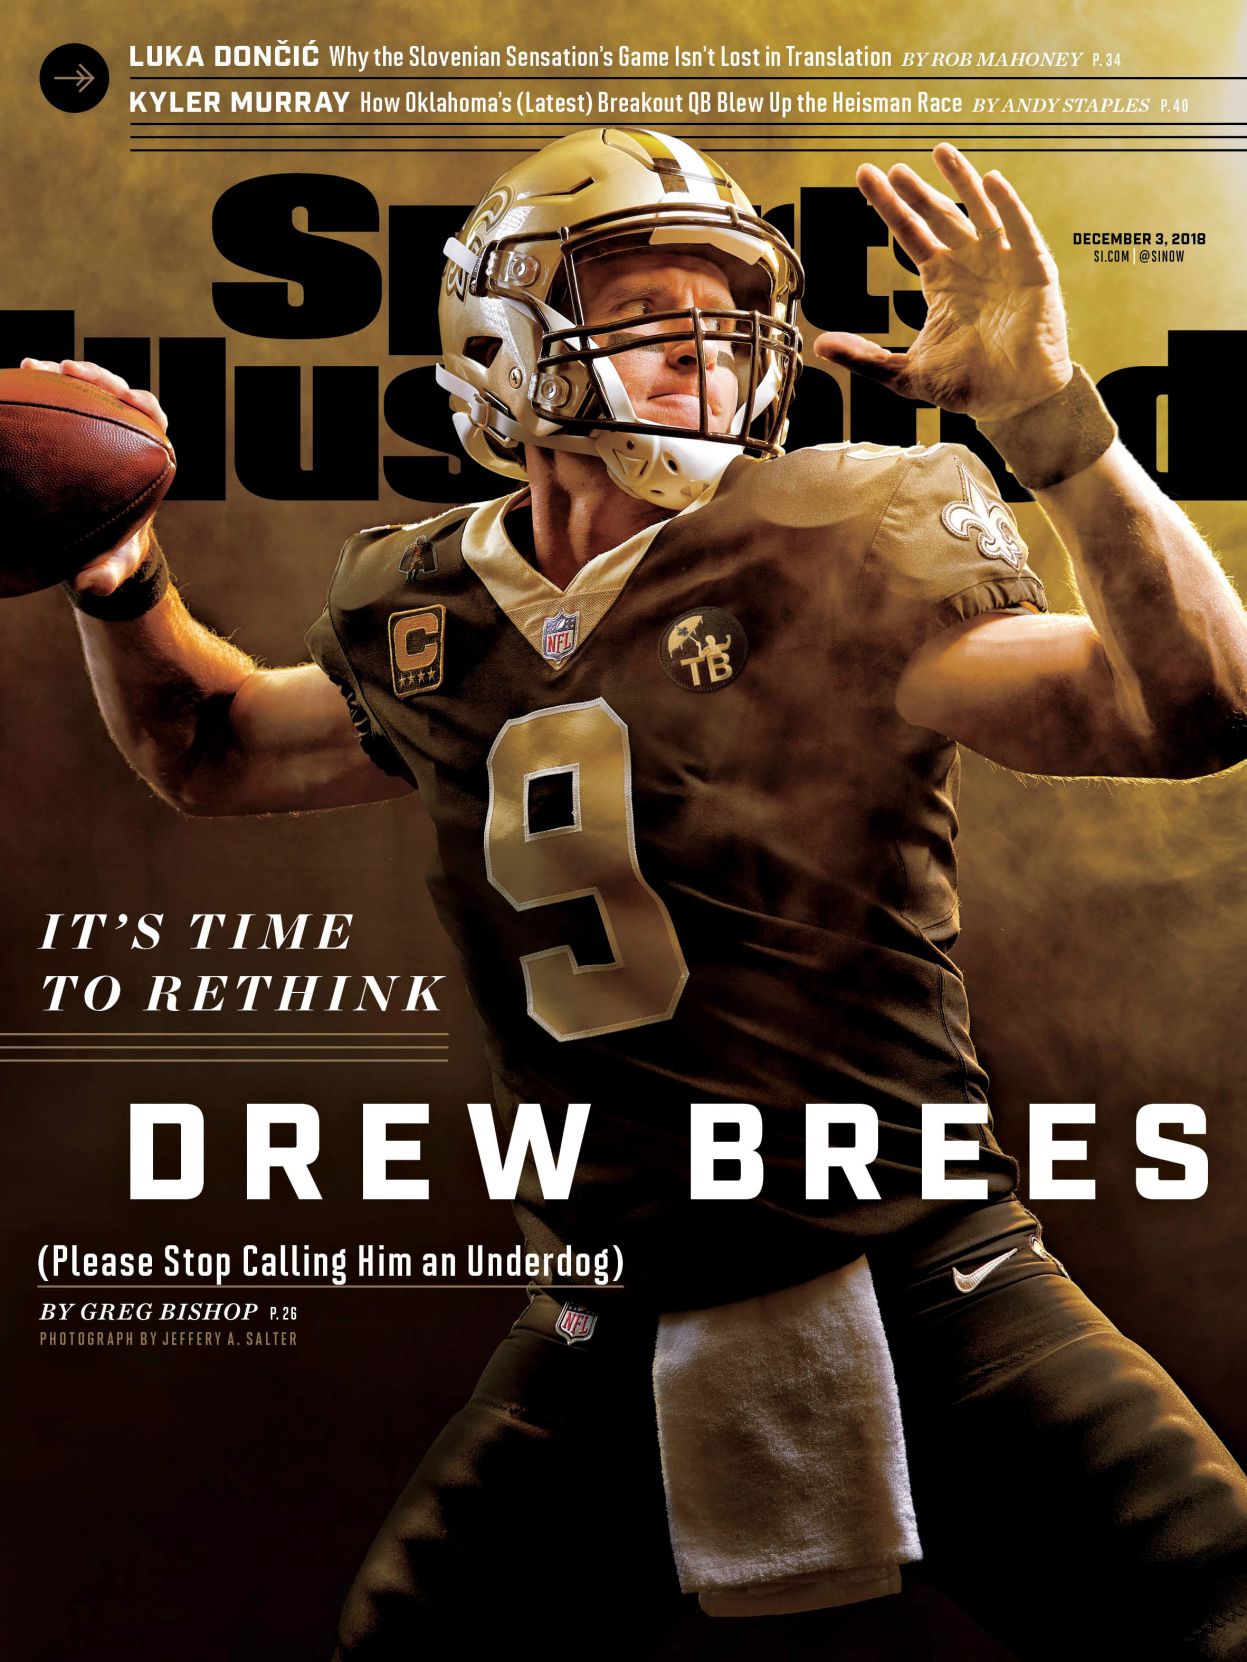 brees color rush jersey